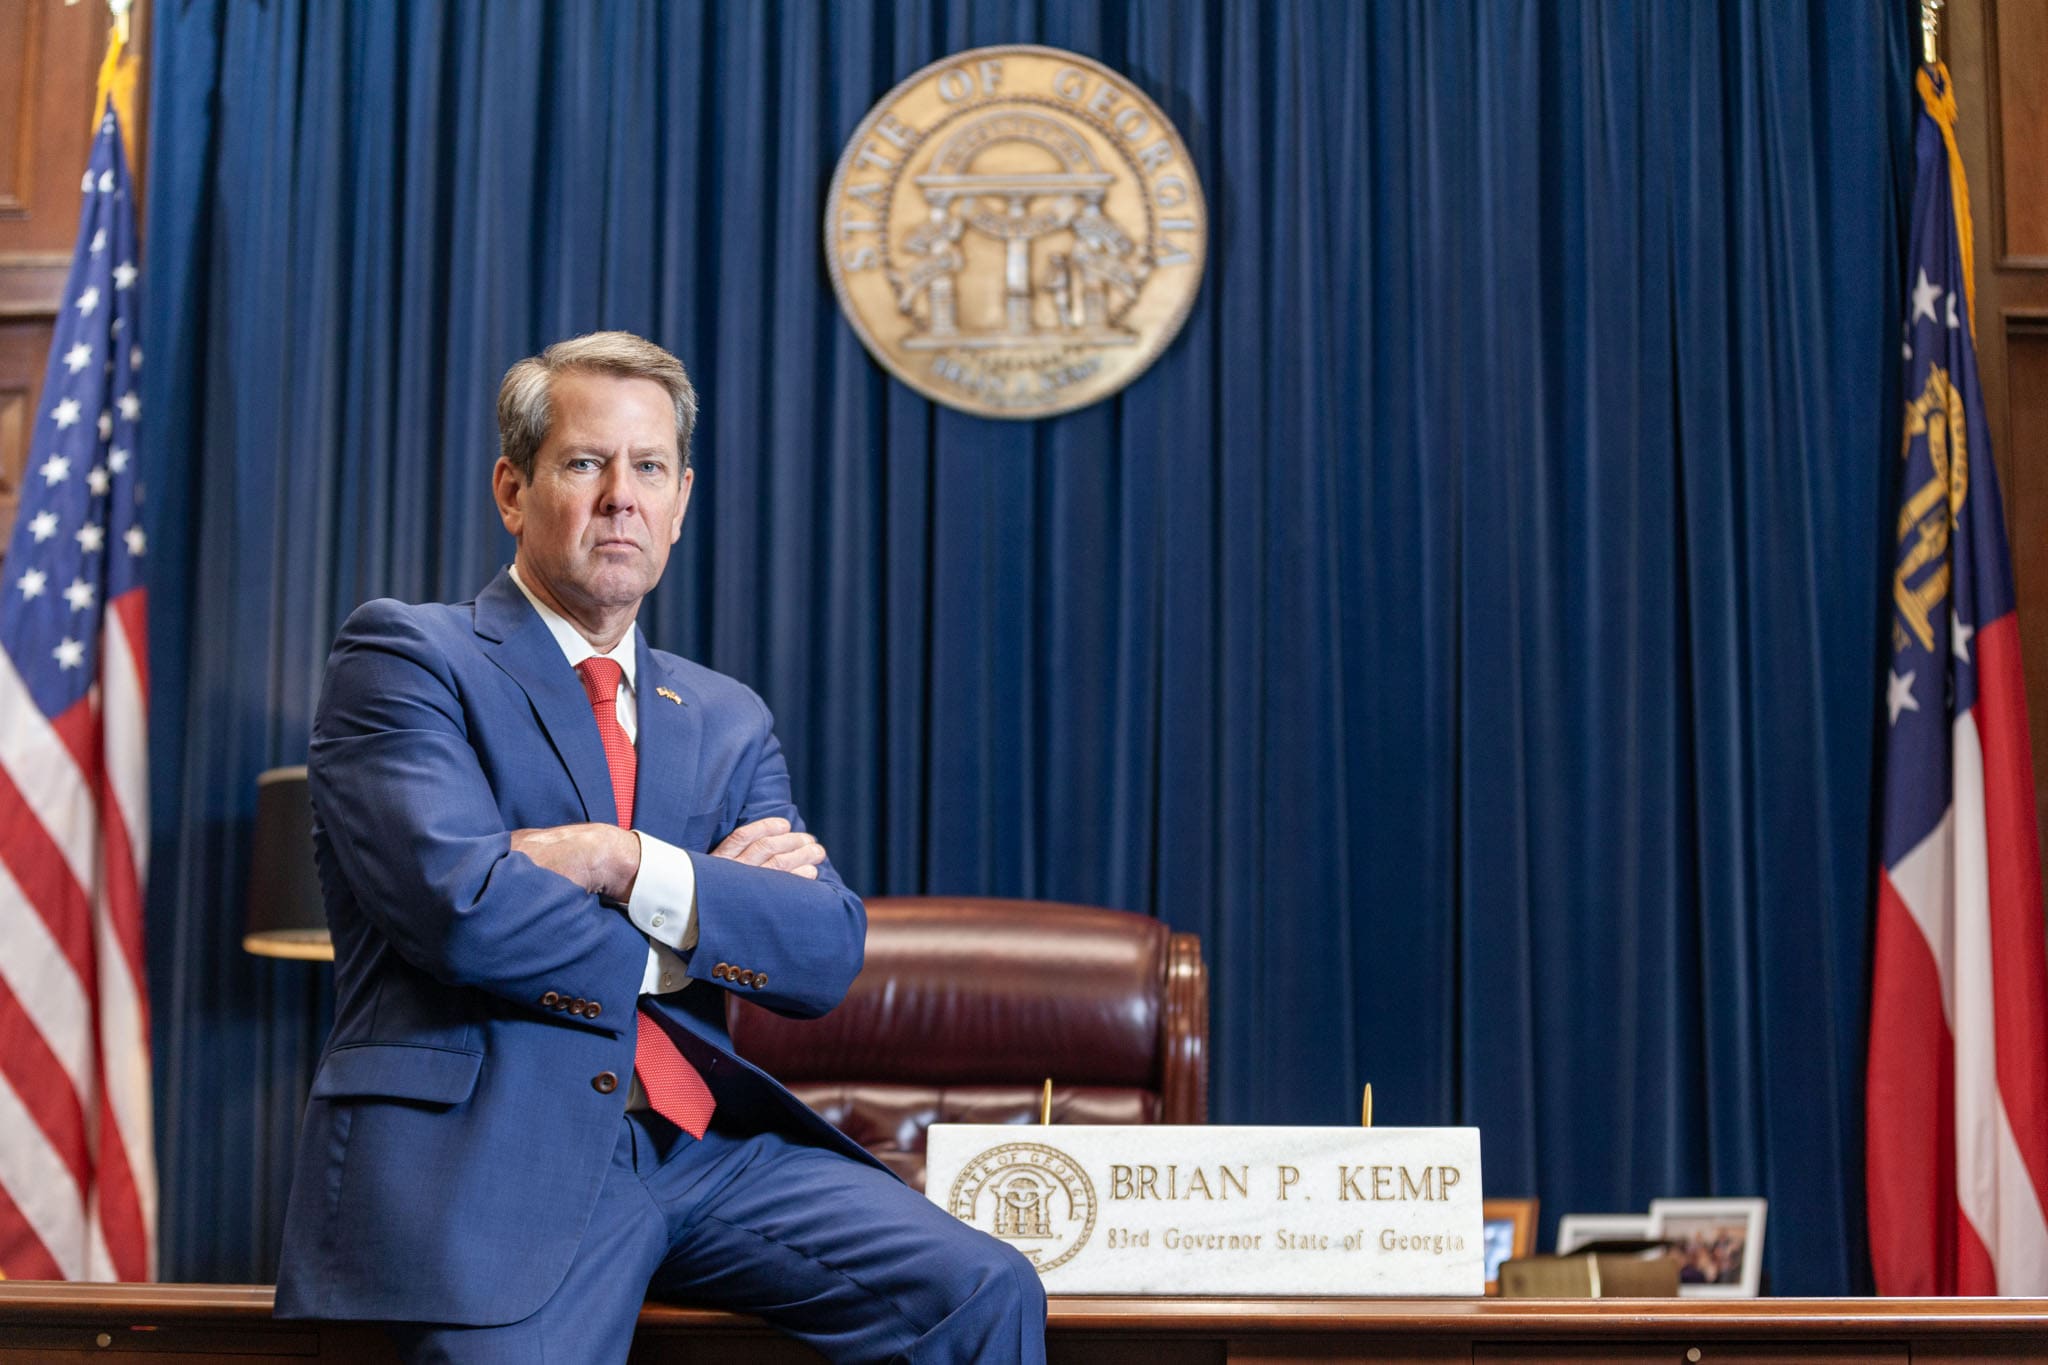 Georgia Governor Brian Kemp sitting with arms folded on his desk at the Georgia State Capitol.